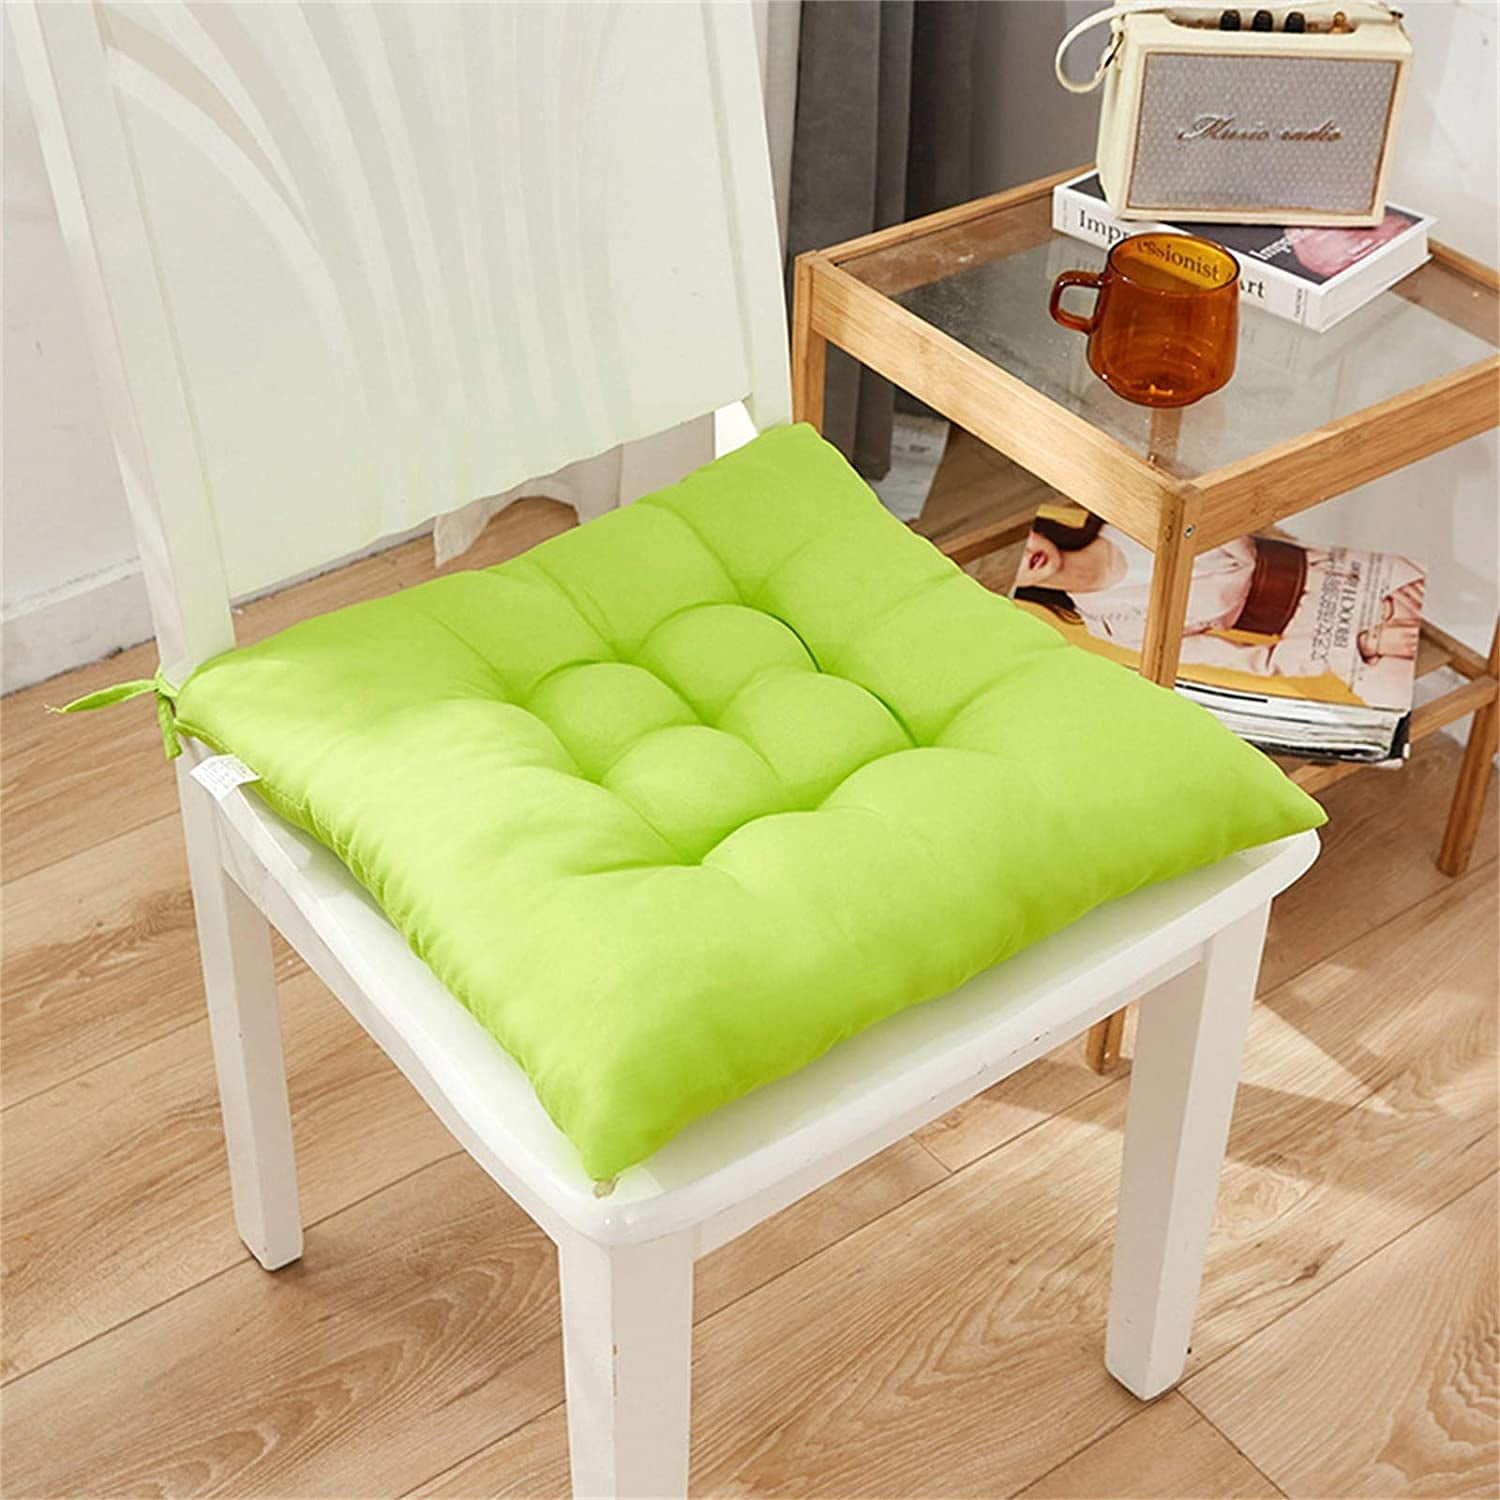 Soft Plush Chair Pads with Ties Winter Indoor Warmth Square Chair Covering Nonslip Comfort Dining Seat Pads Stool Mat Cover Decoration for Home